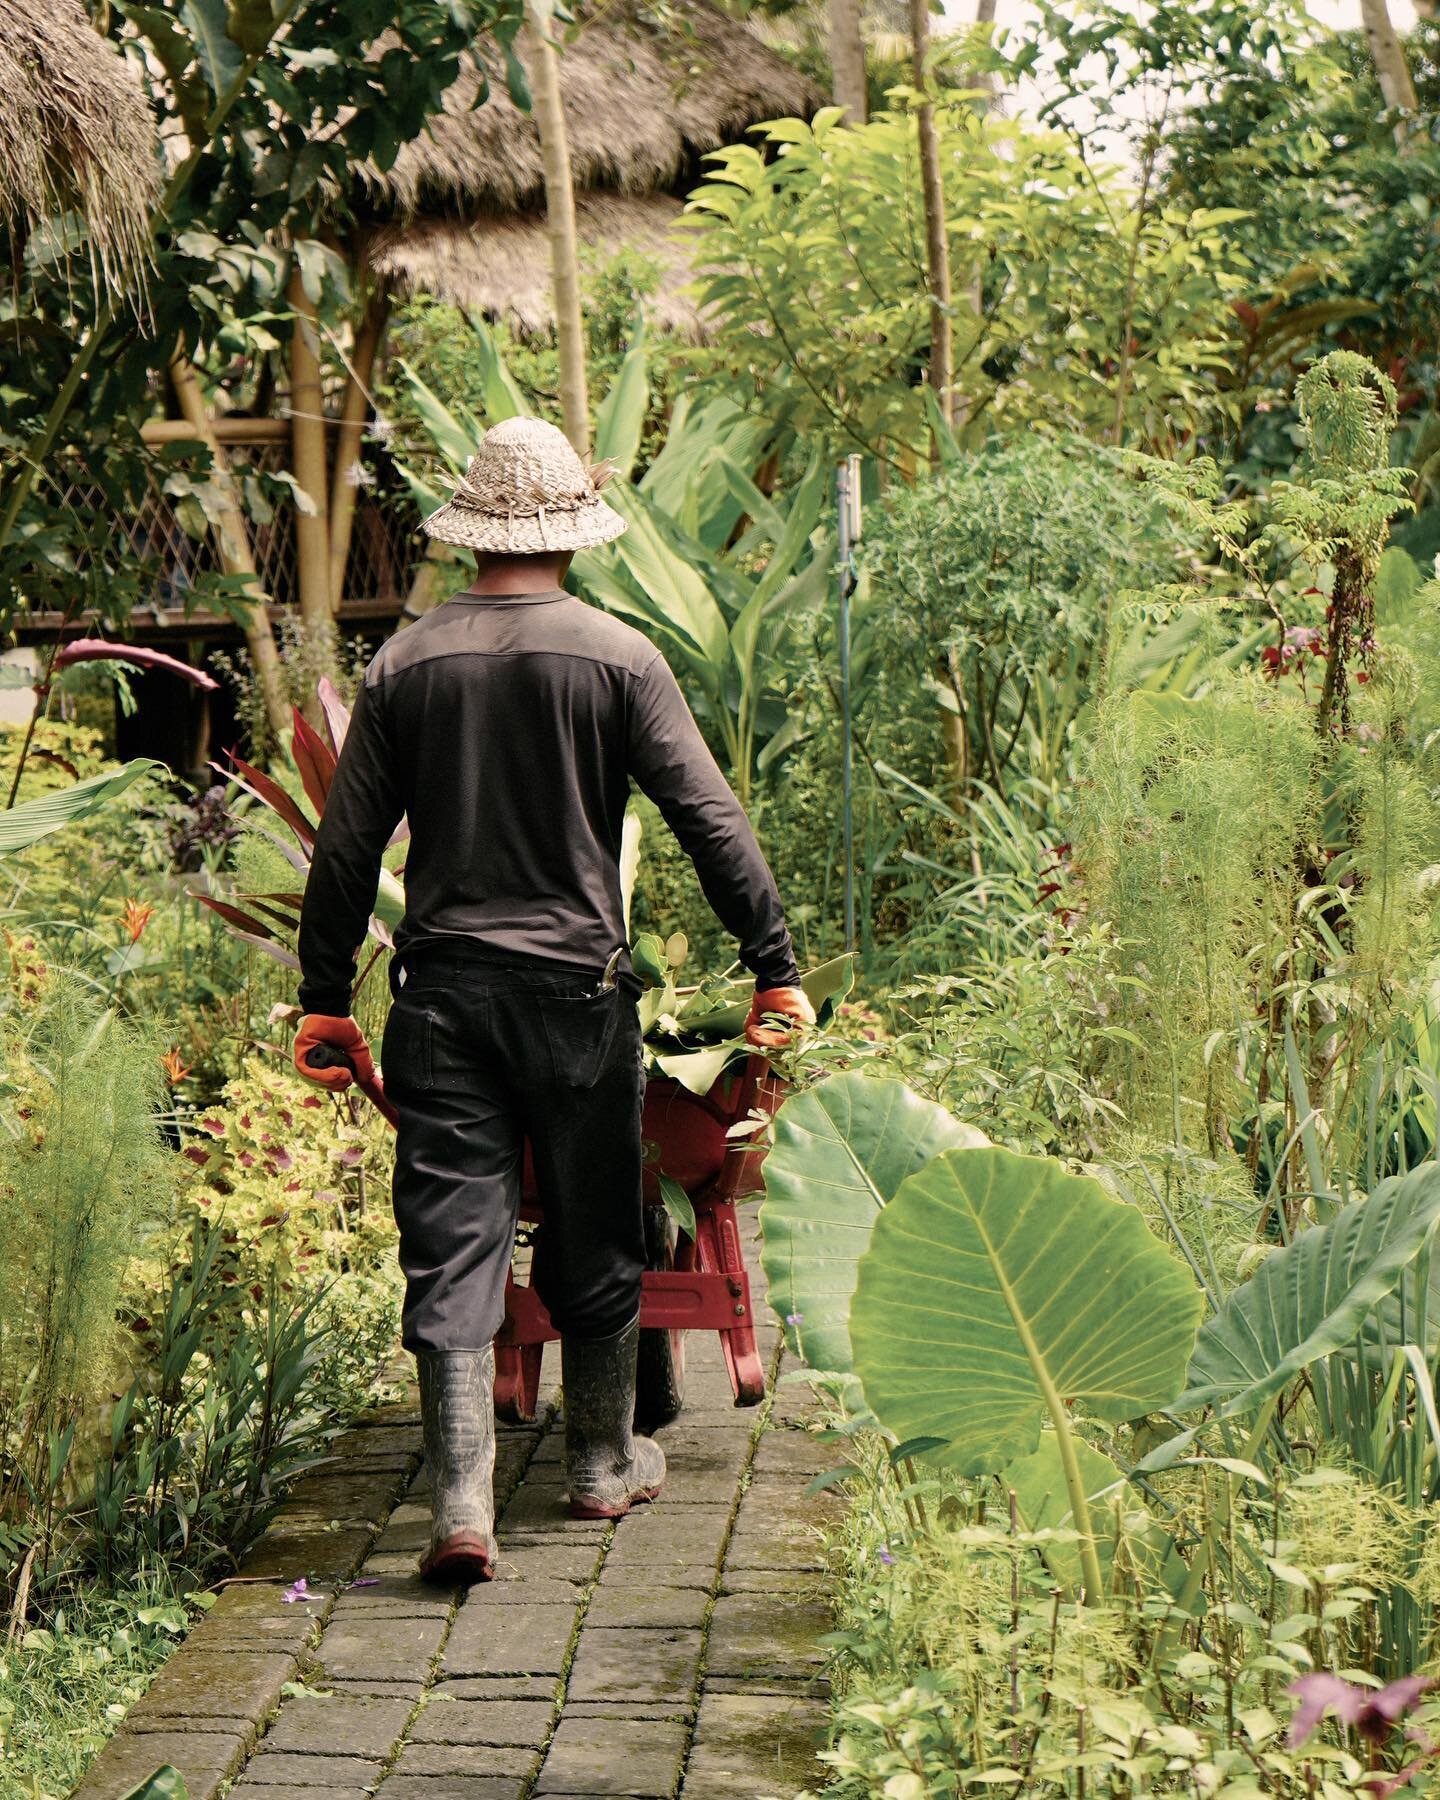 Nurturing nature's enchantment, our gardener's touch brings Mana Earthly Paradise to life.